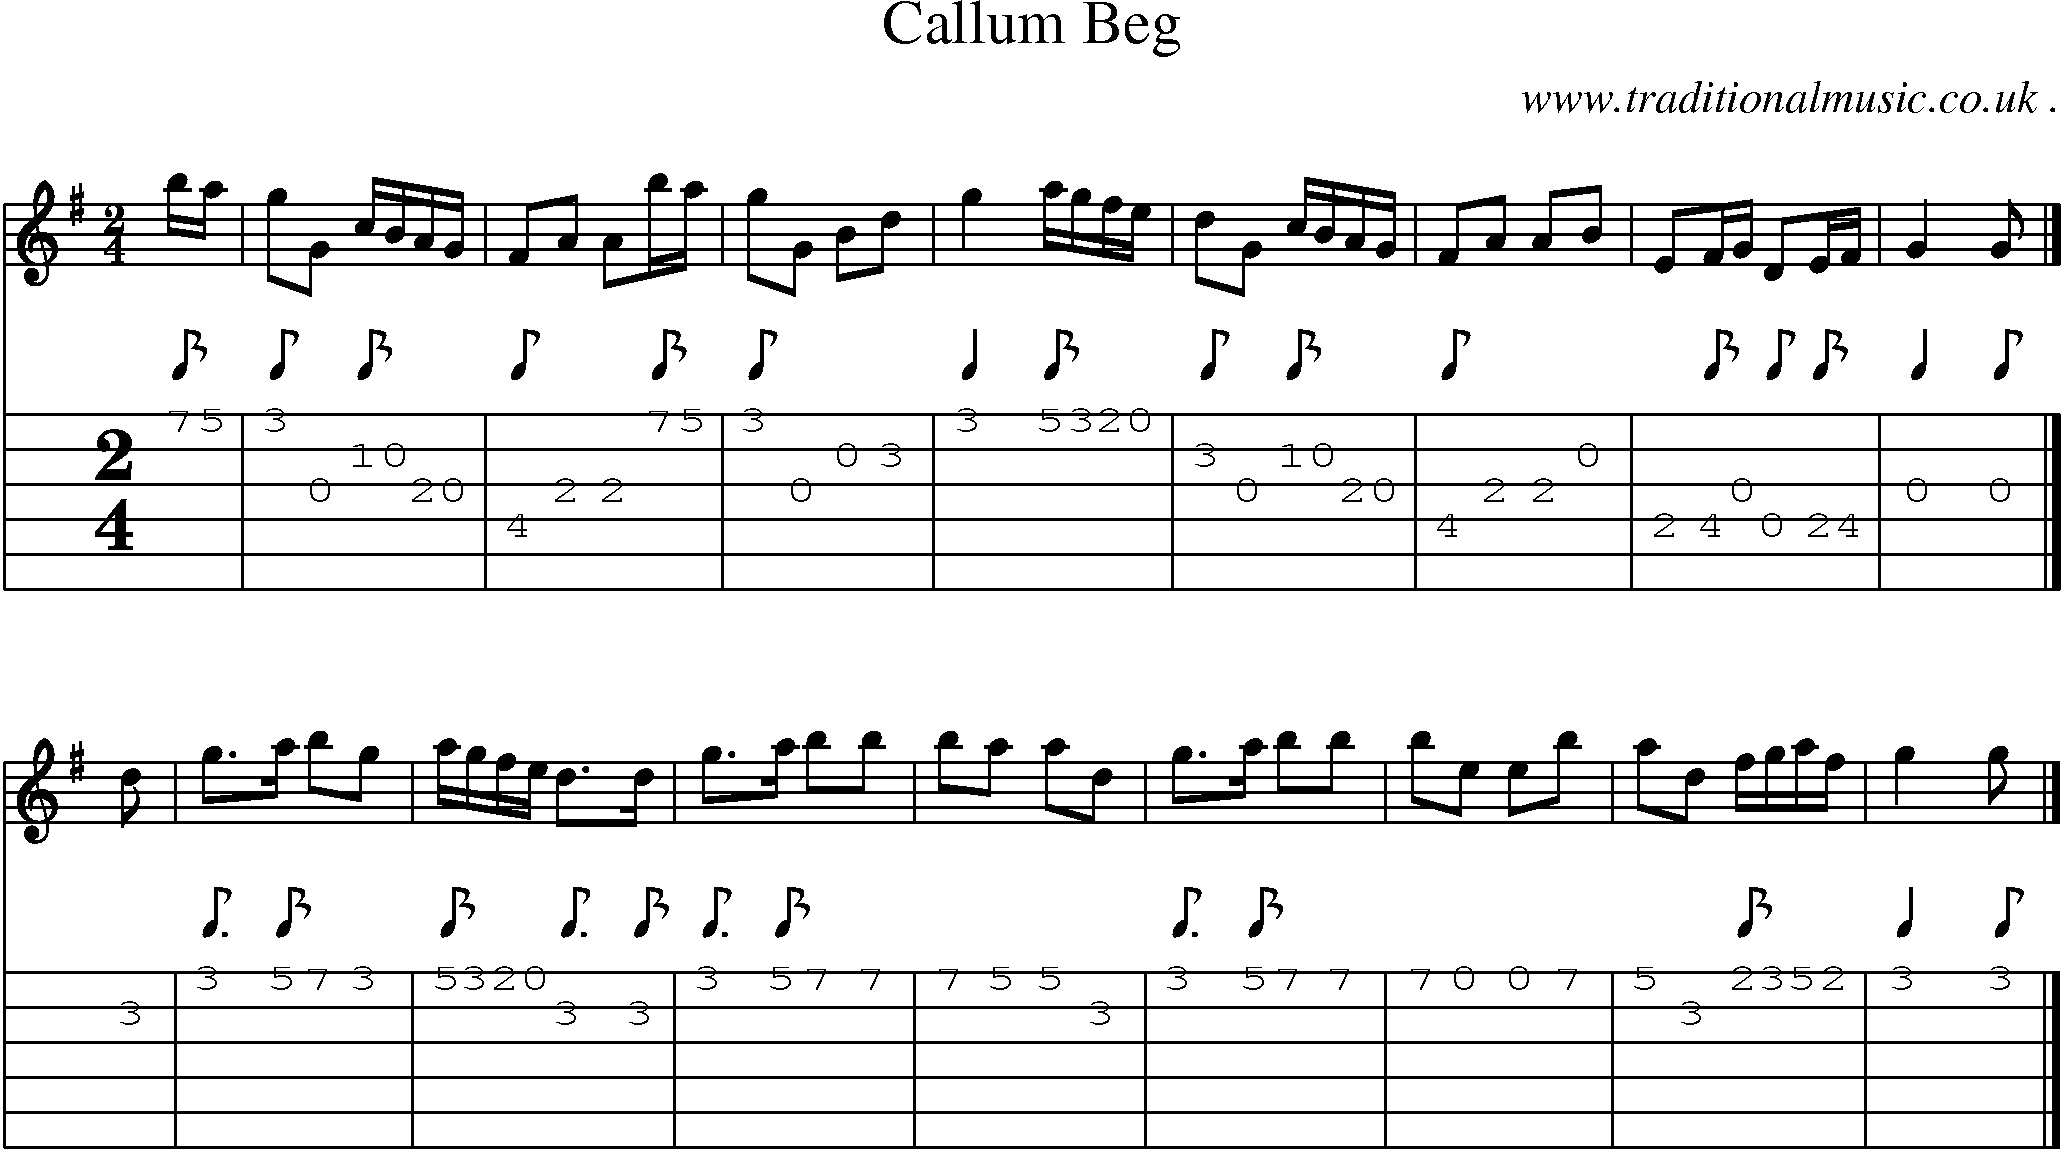 Sheet-music  score, Chords and Guitar Tabs for Callum Beg